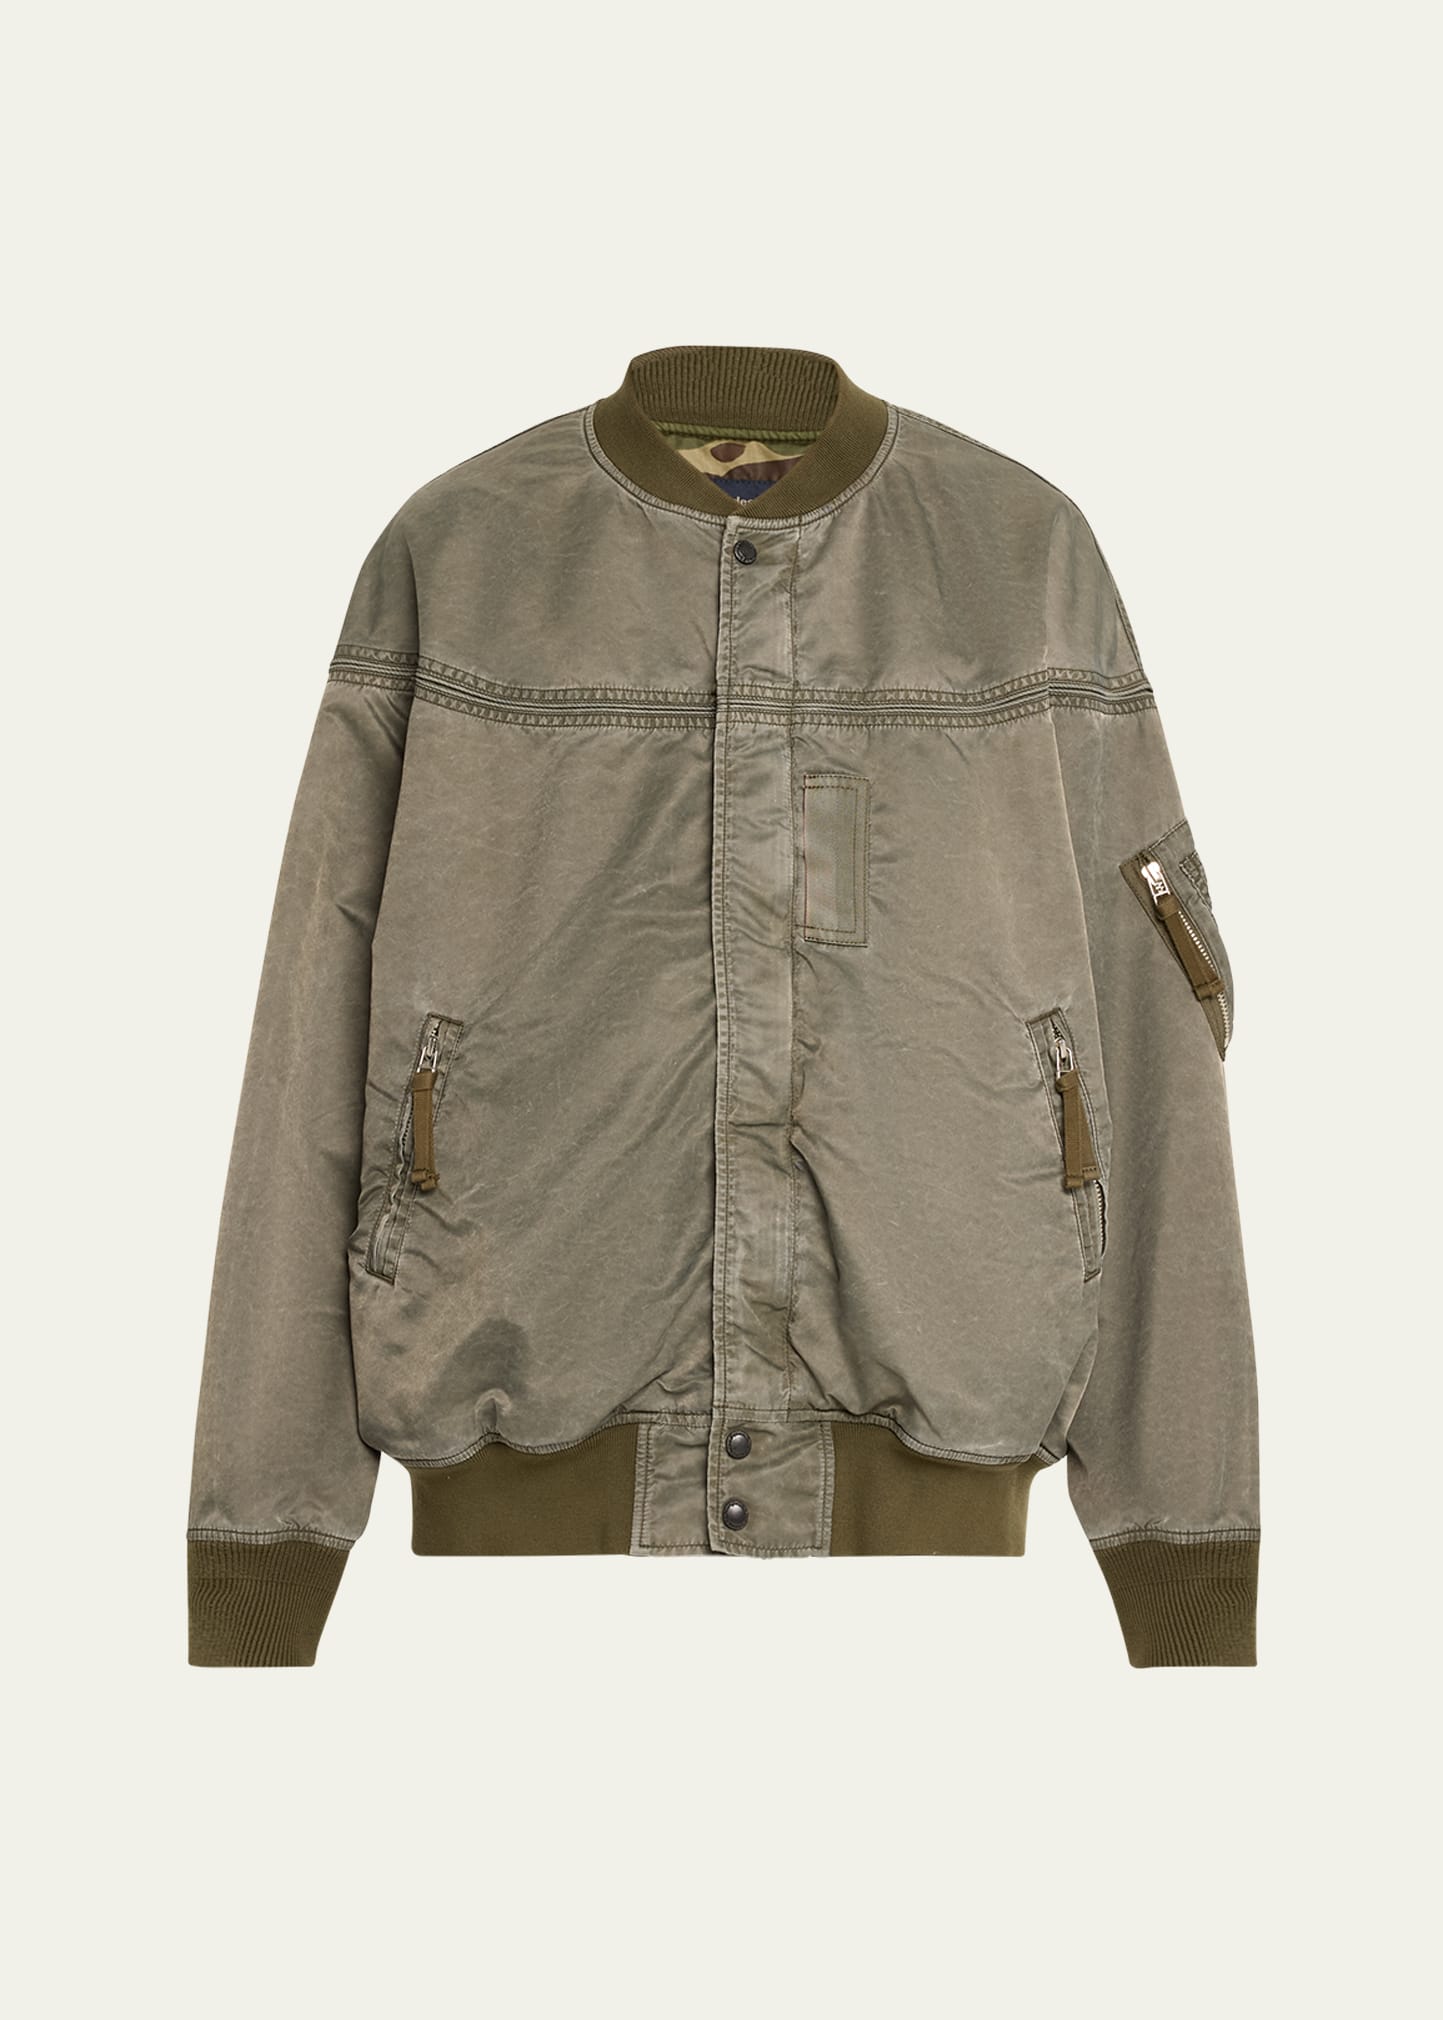 Men's Bomber Jacket with Seam Detail